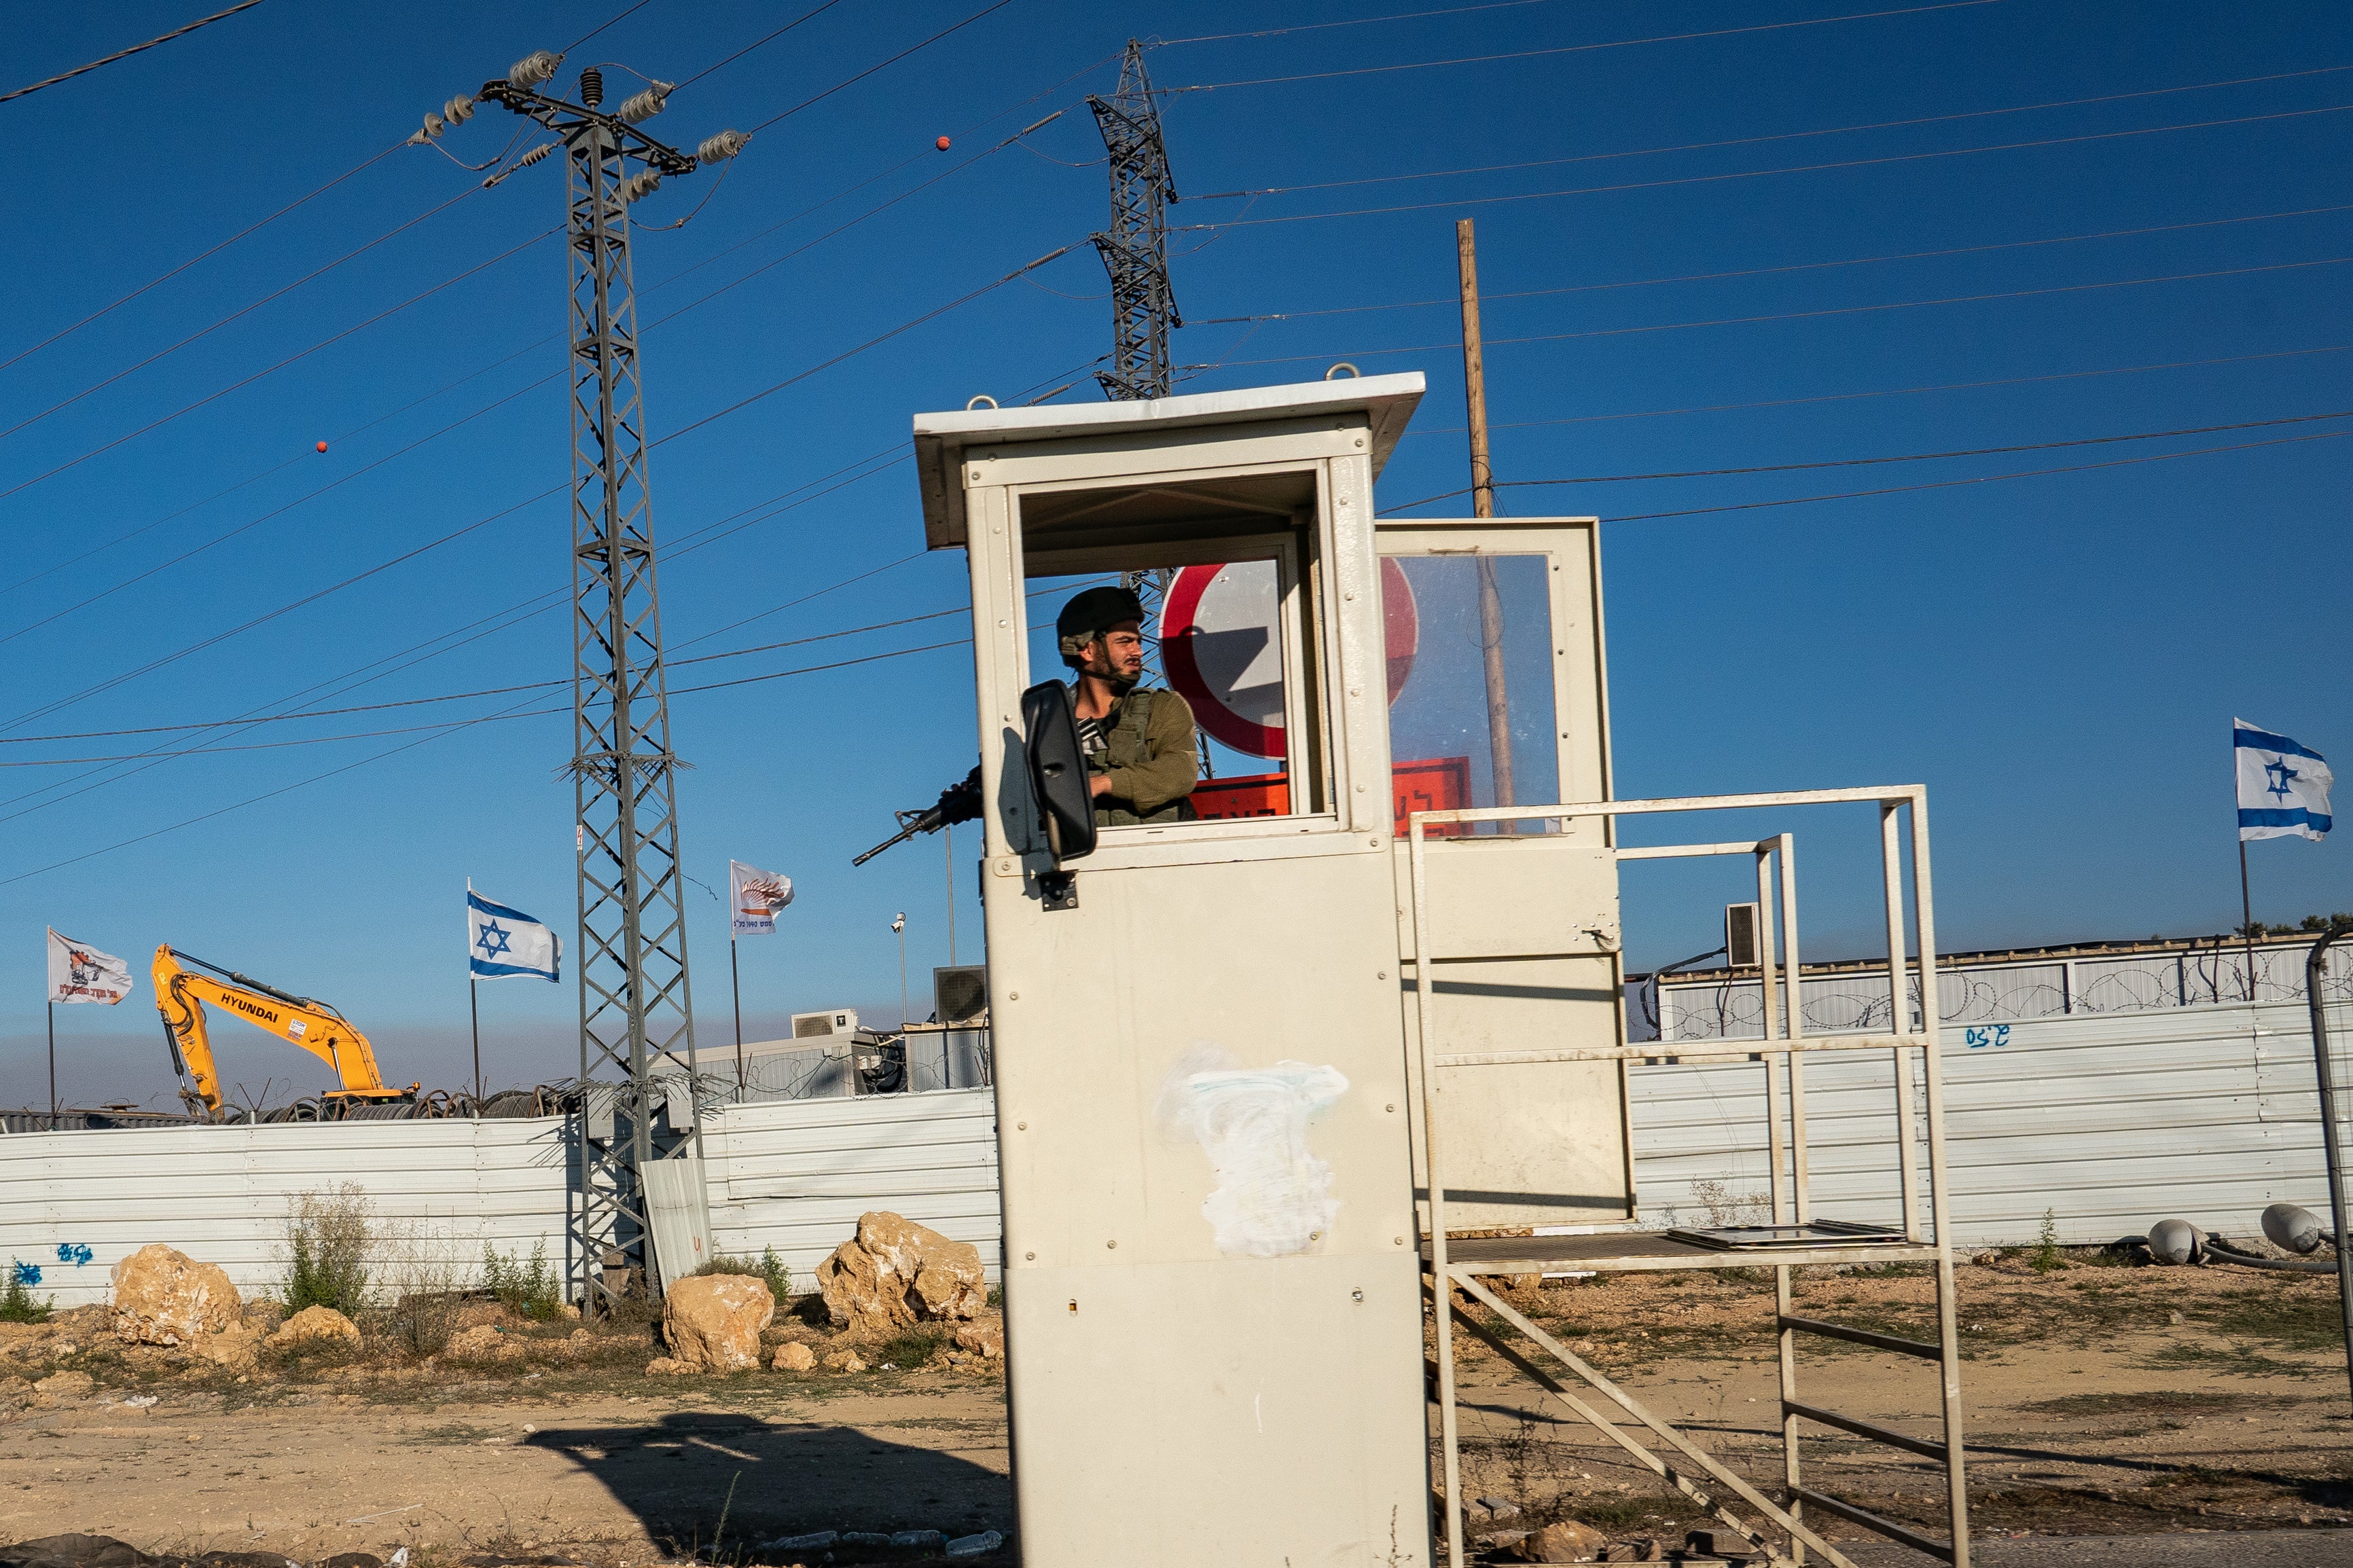 An Israeli soldier is positioned at a bus stop on Route 60 serving an Israeli settlement near Bethlehem